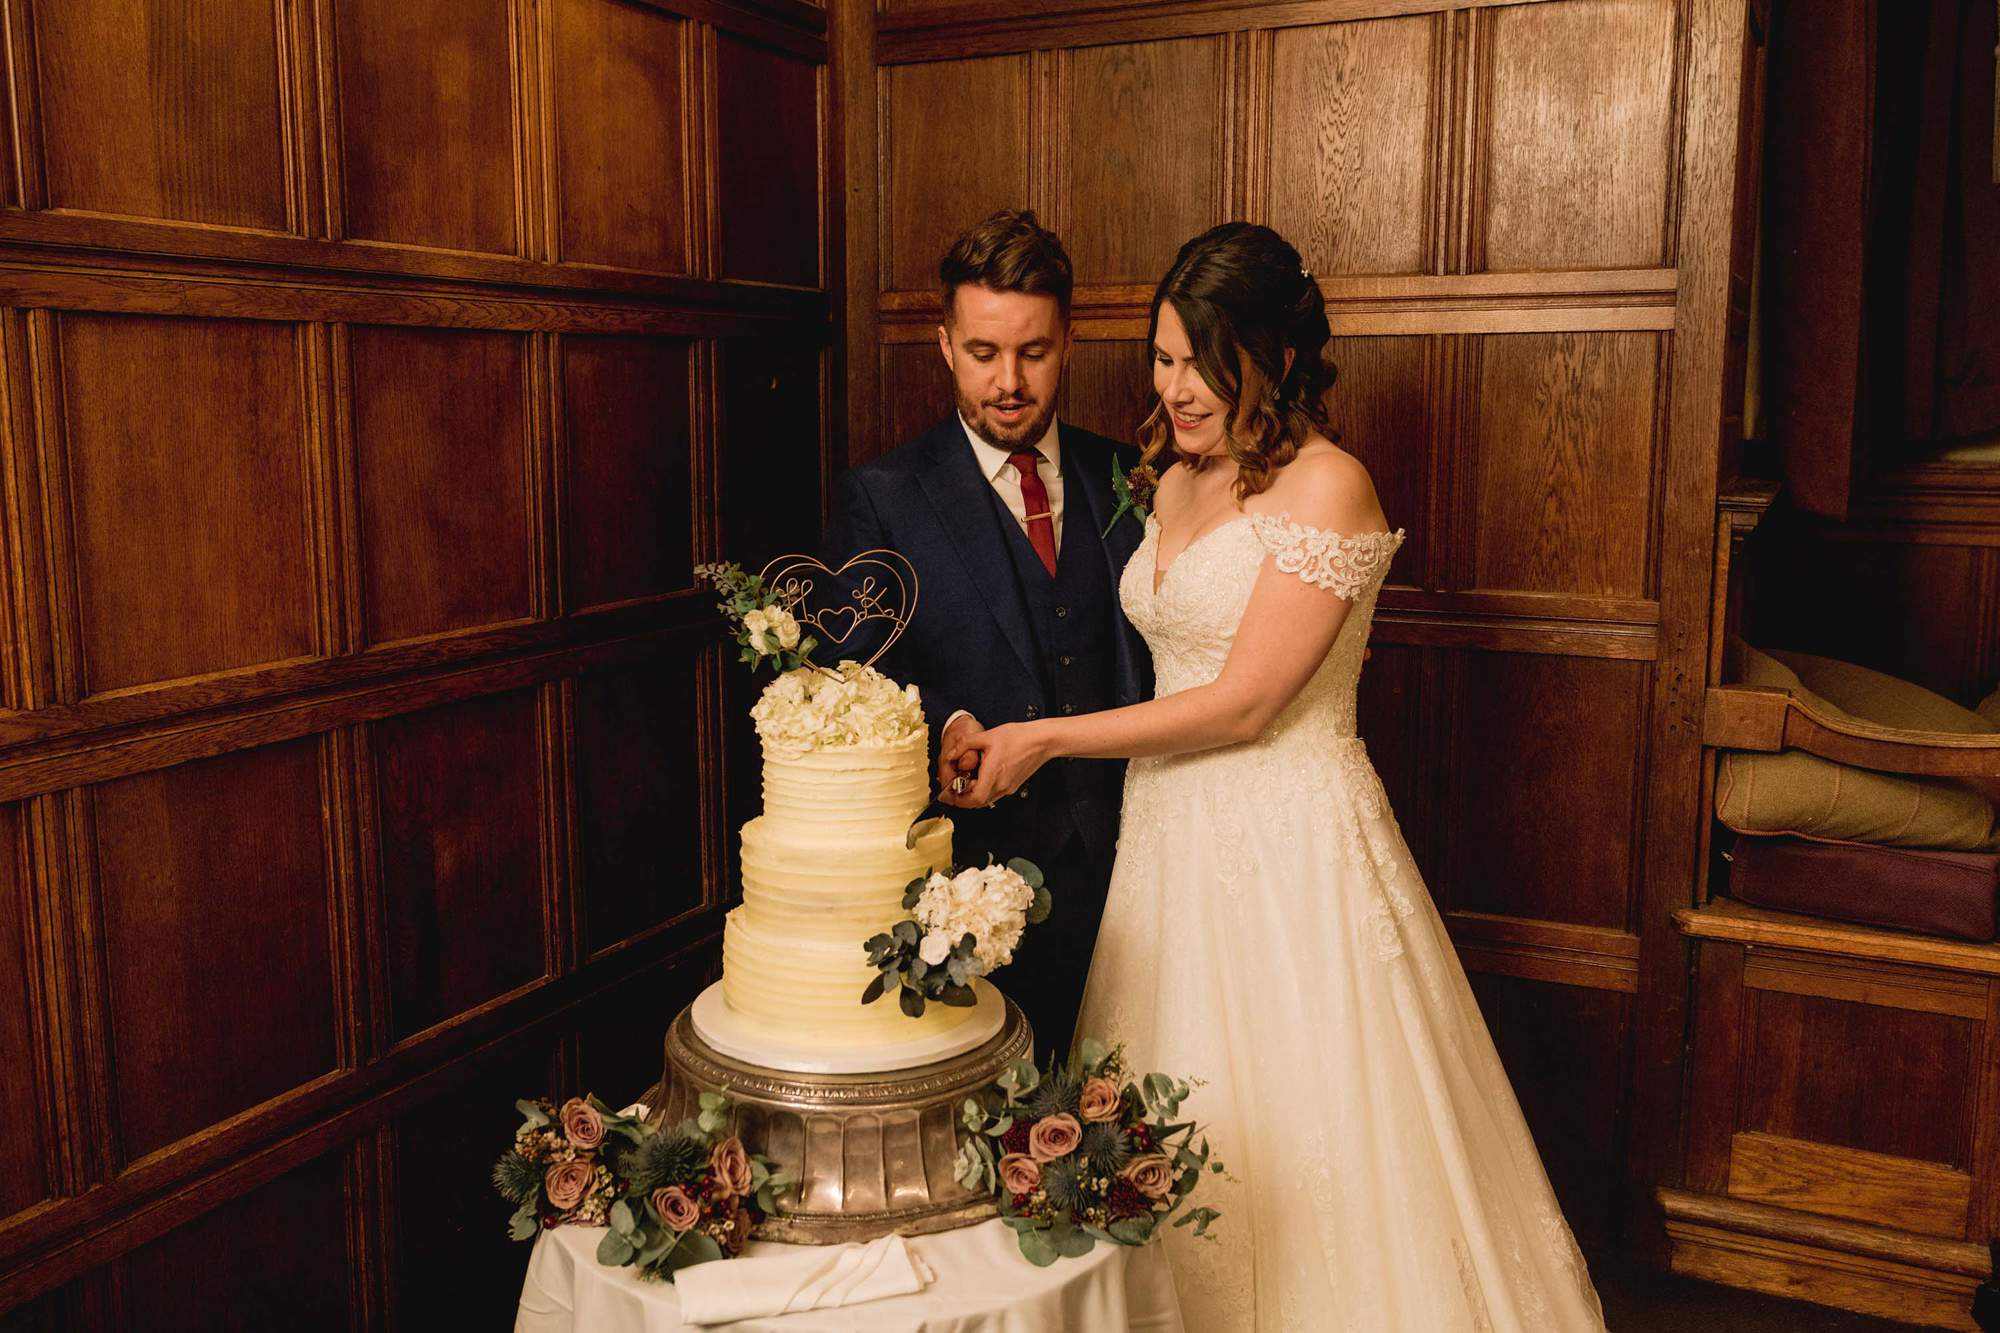 Bride and groom cut the wedding cake at Rhinefield House wedding venue in Hampshire.